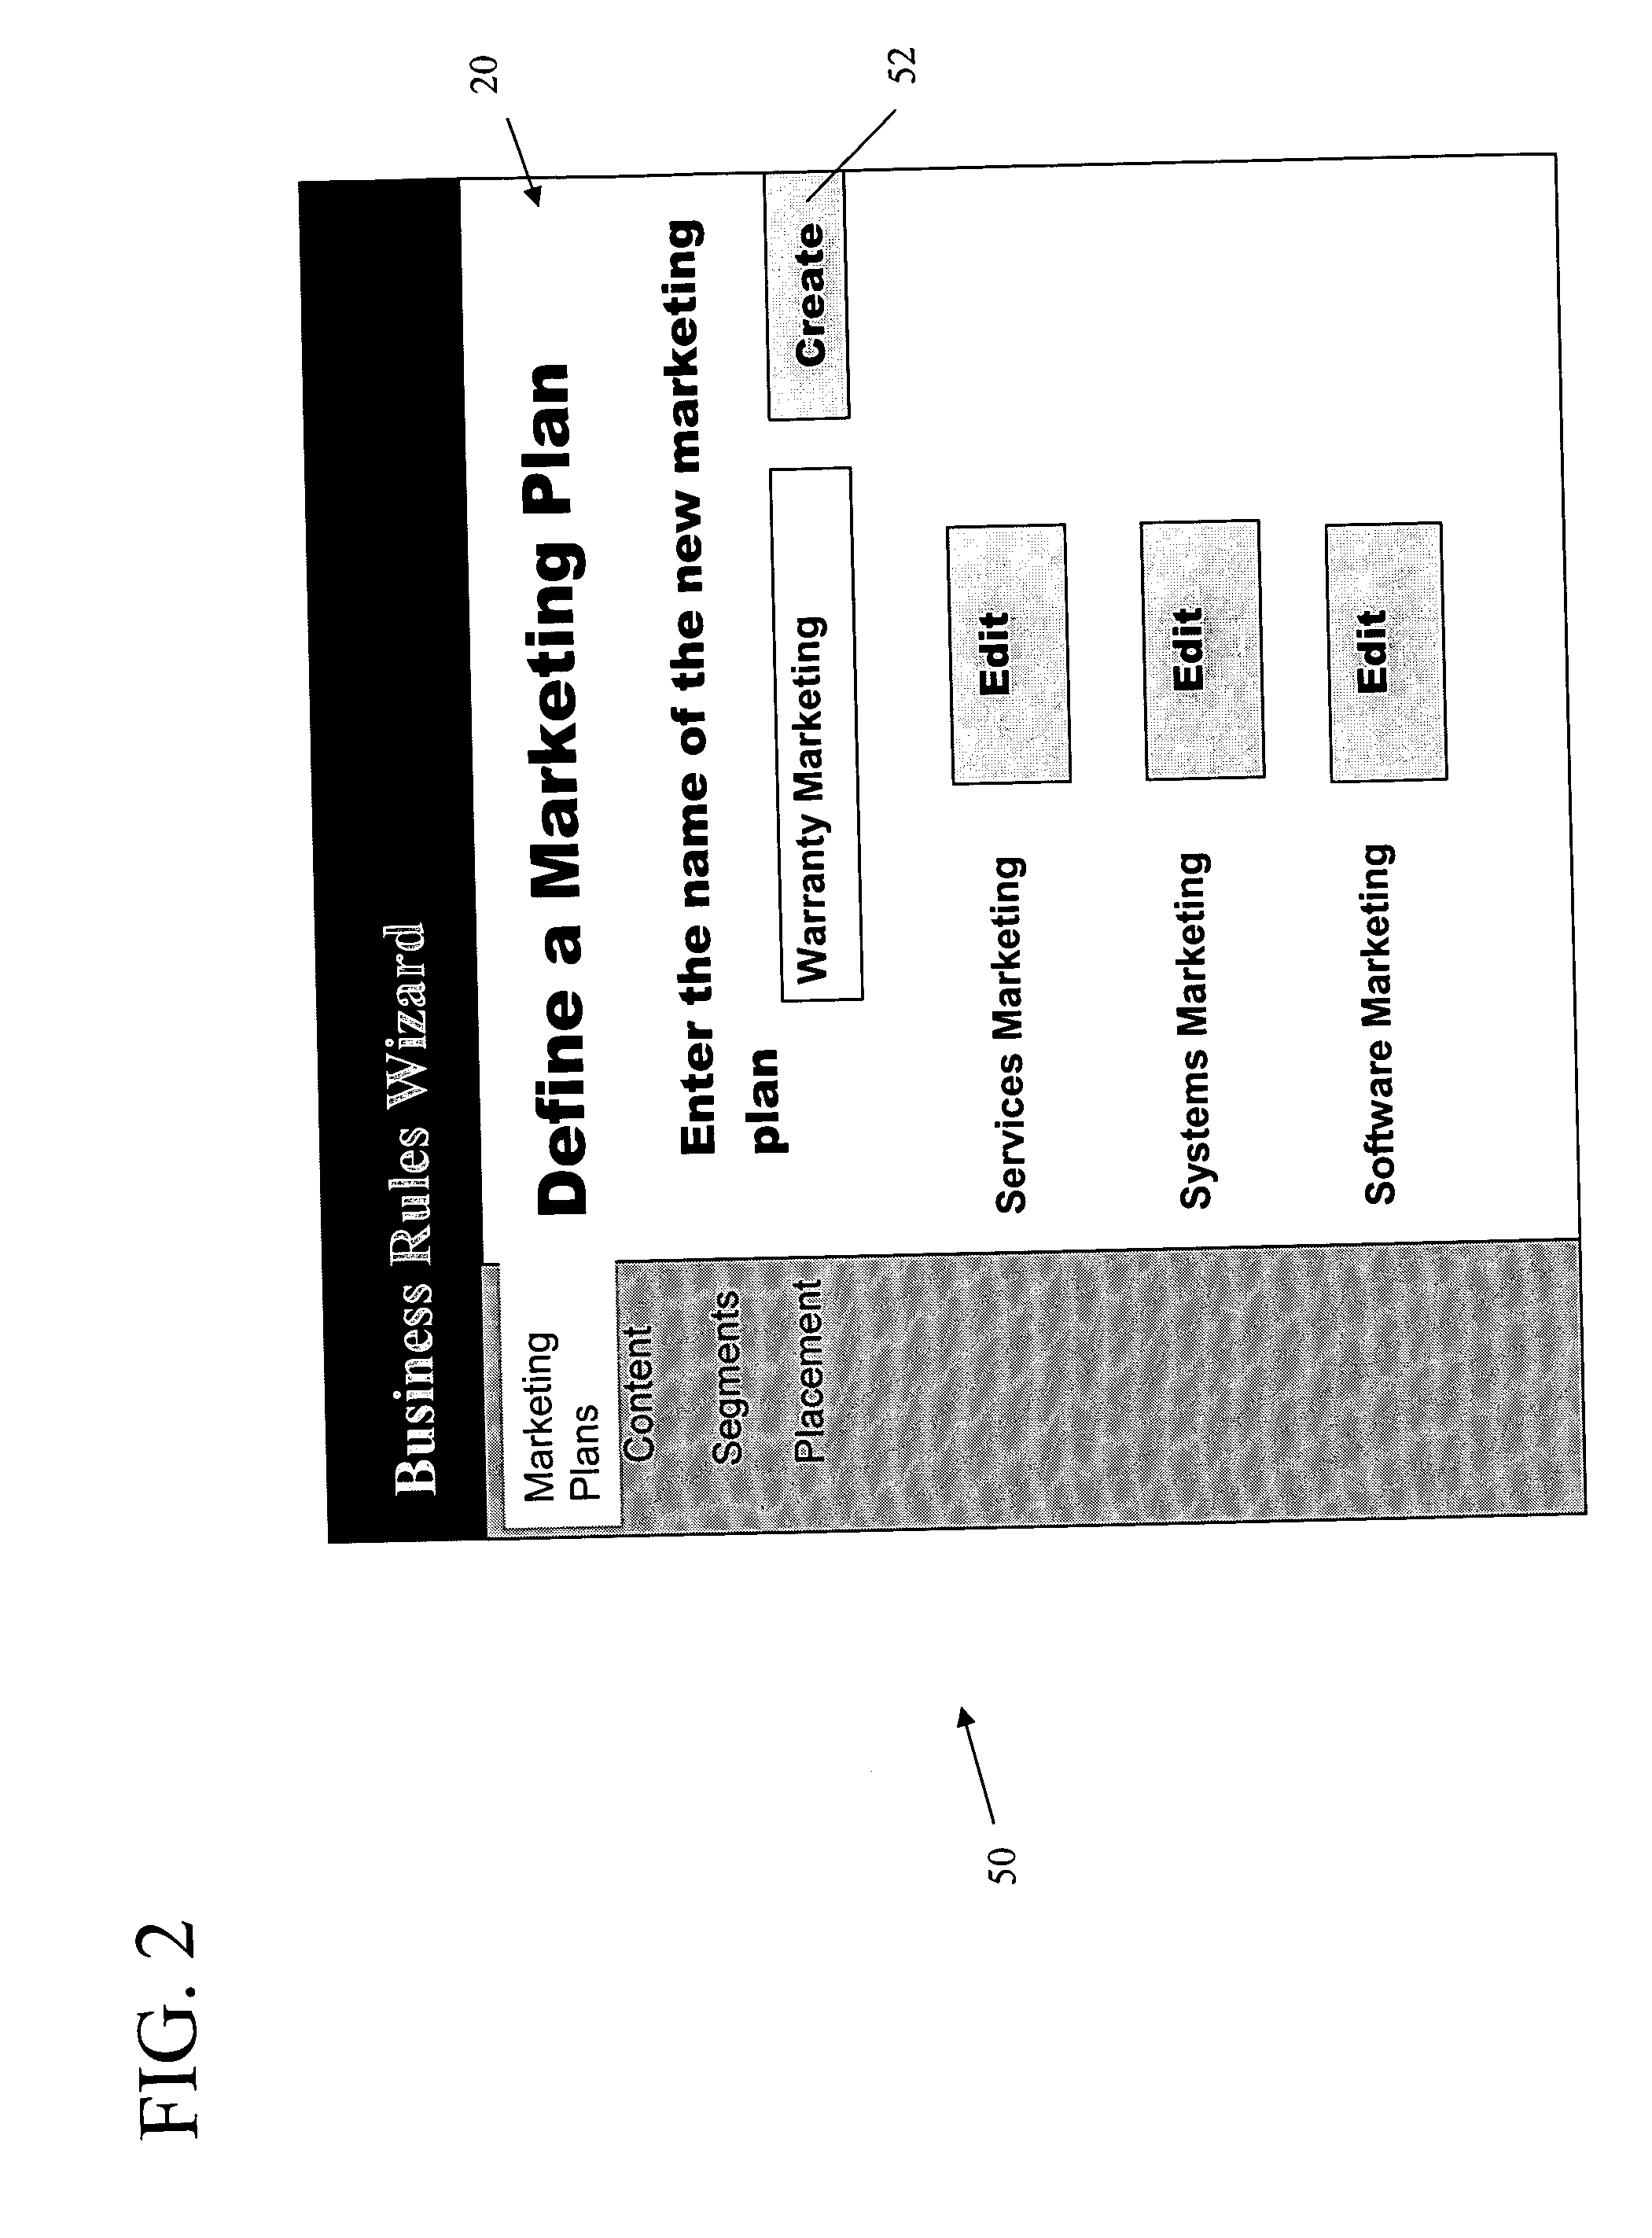 System and method for generating content rules for a website